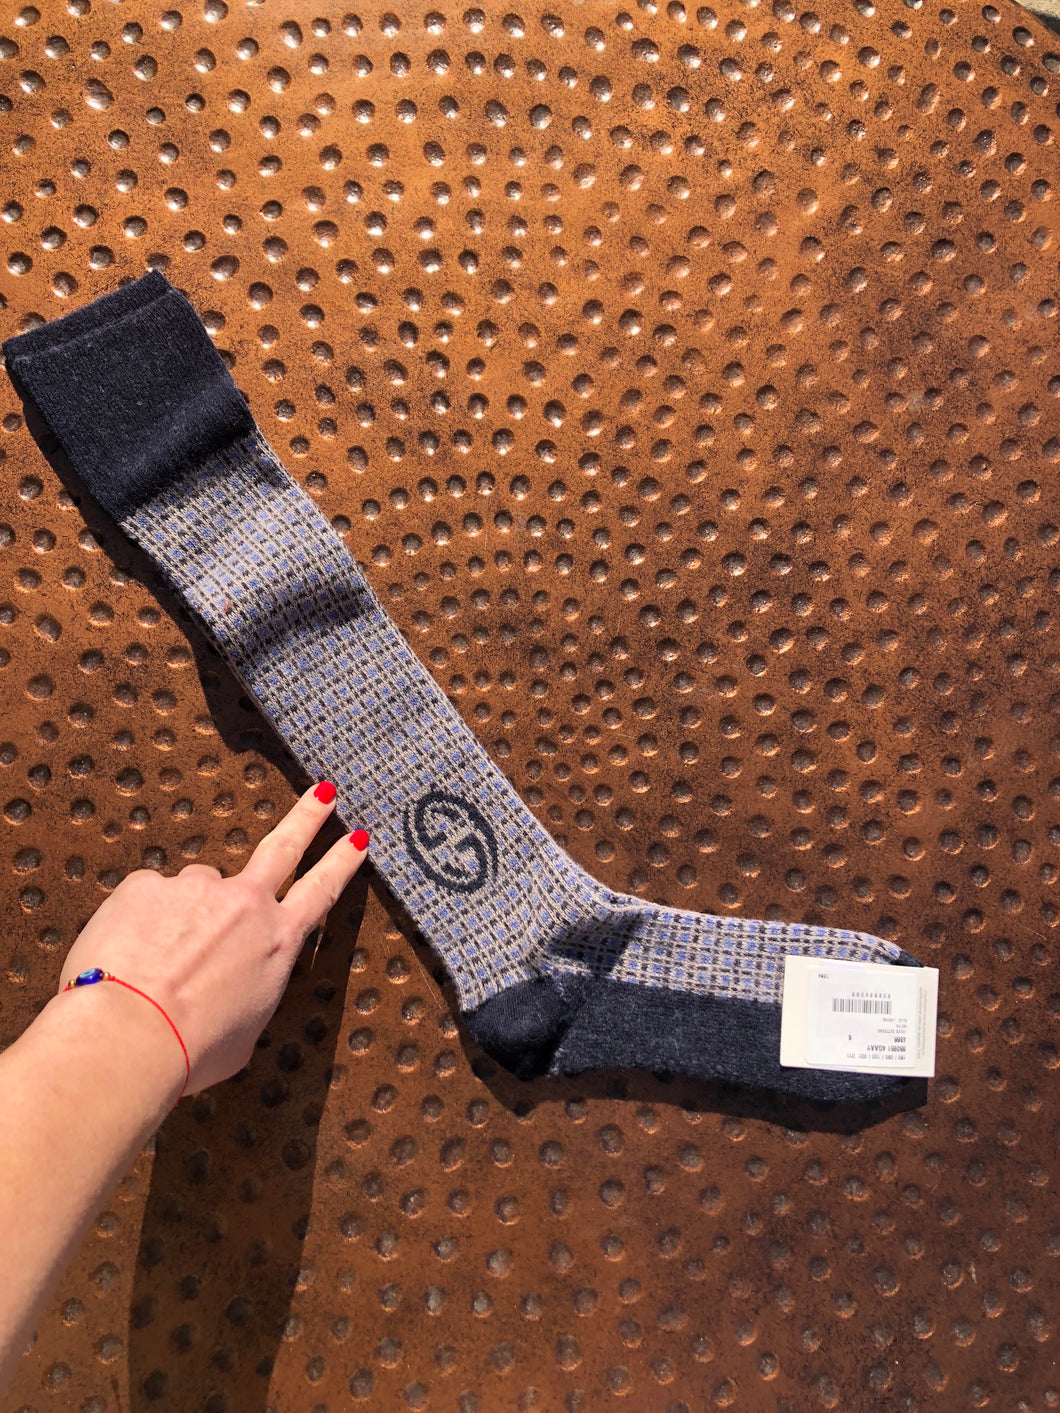 Gucci Soft Combed Wool Knee High Socks in Blue